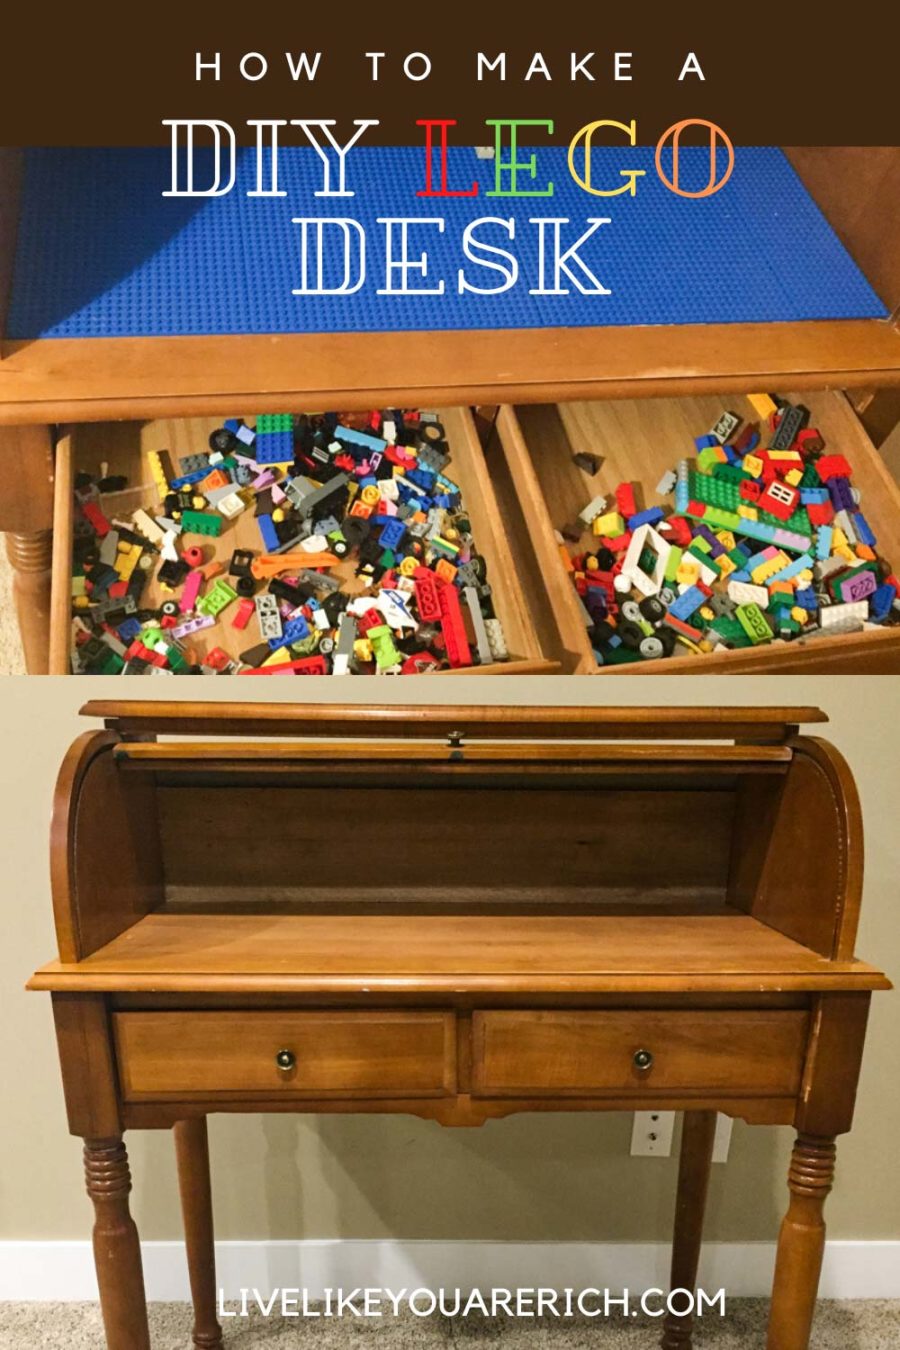 I wanted to make a DIY Lego Desk or table for my son’s legos. I got a roll-top desk for $20.00 on a local classified ad site. Together, with a friend, we built a customized DIY lego roll top desk. The kids have absolutely love it.  #diy #legodesk #diyproject #legostand